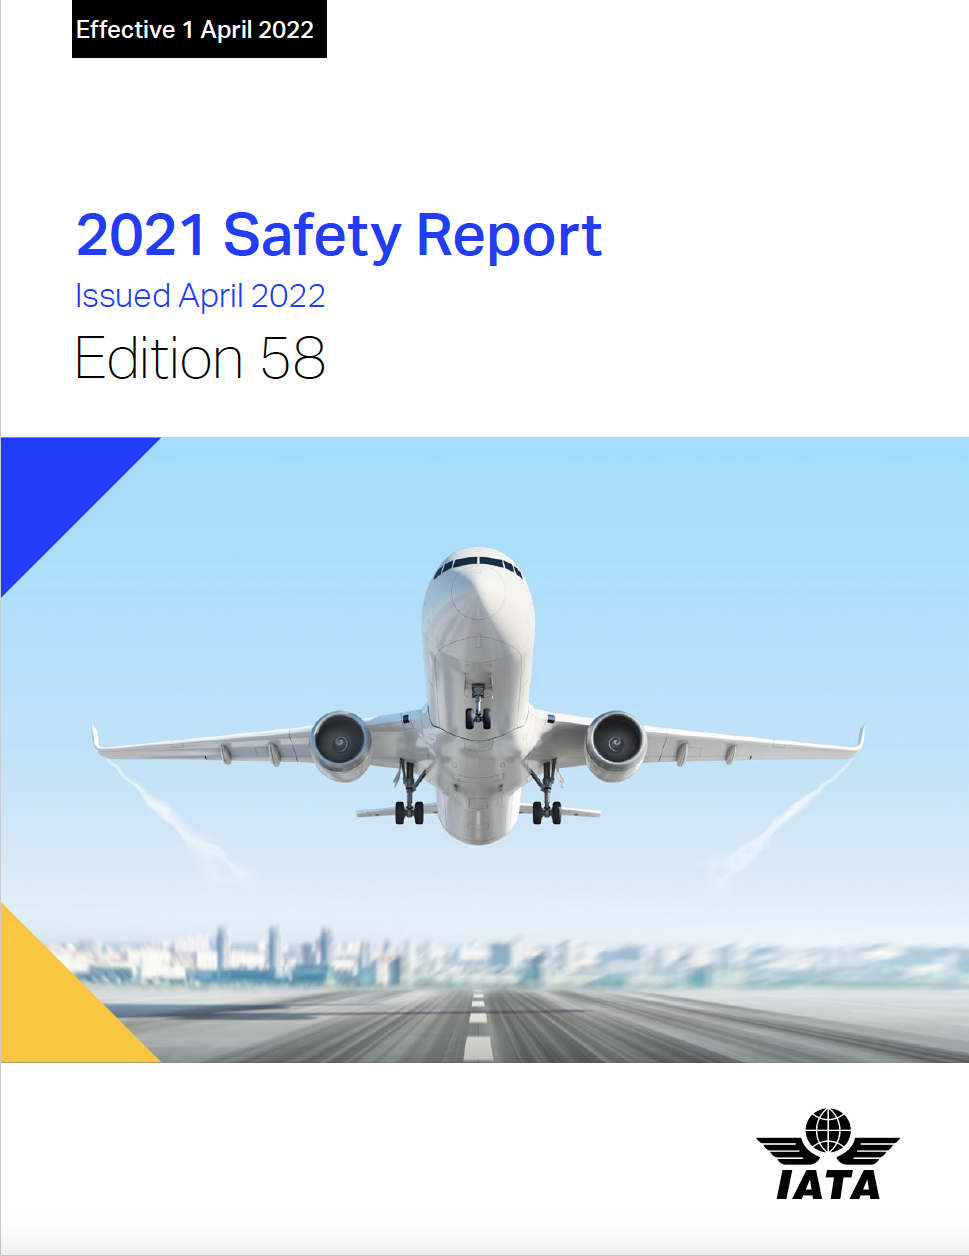 iata-safety-report-2021-cover